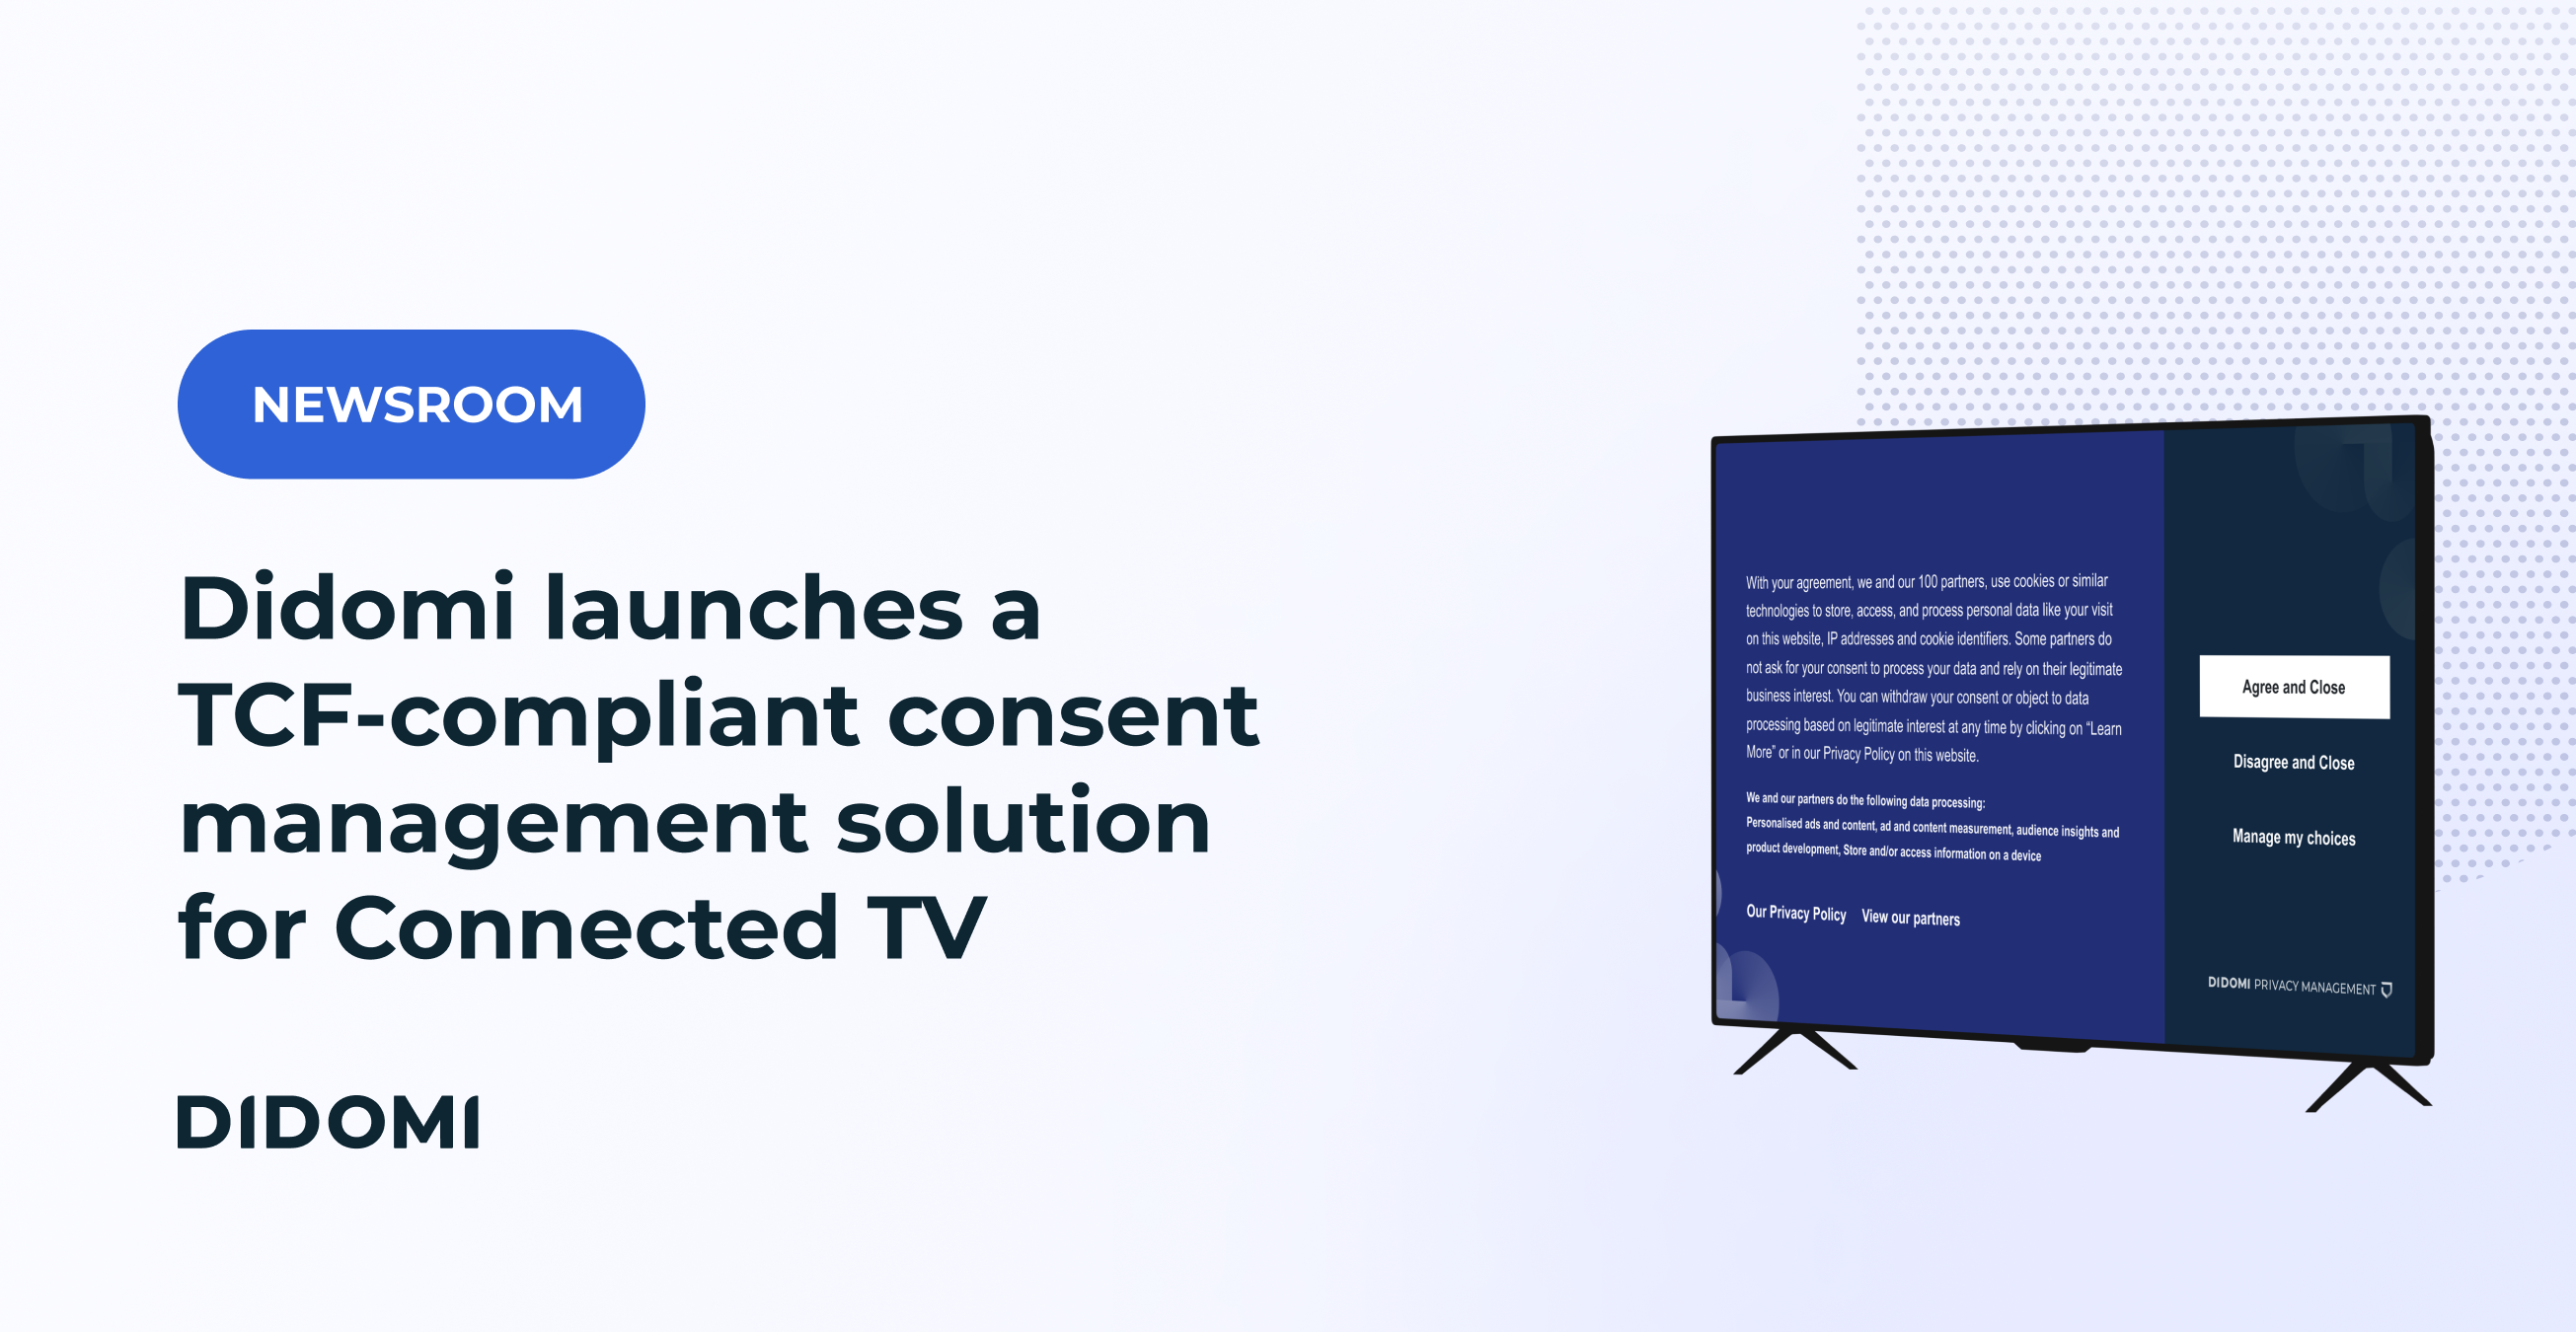 Didomi launches a TCF-compliant consent management solution for Connected TV